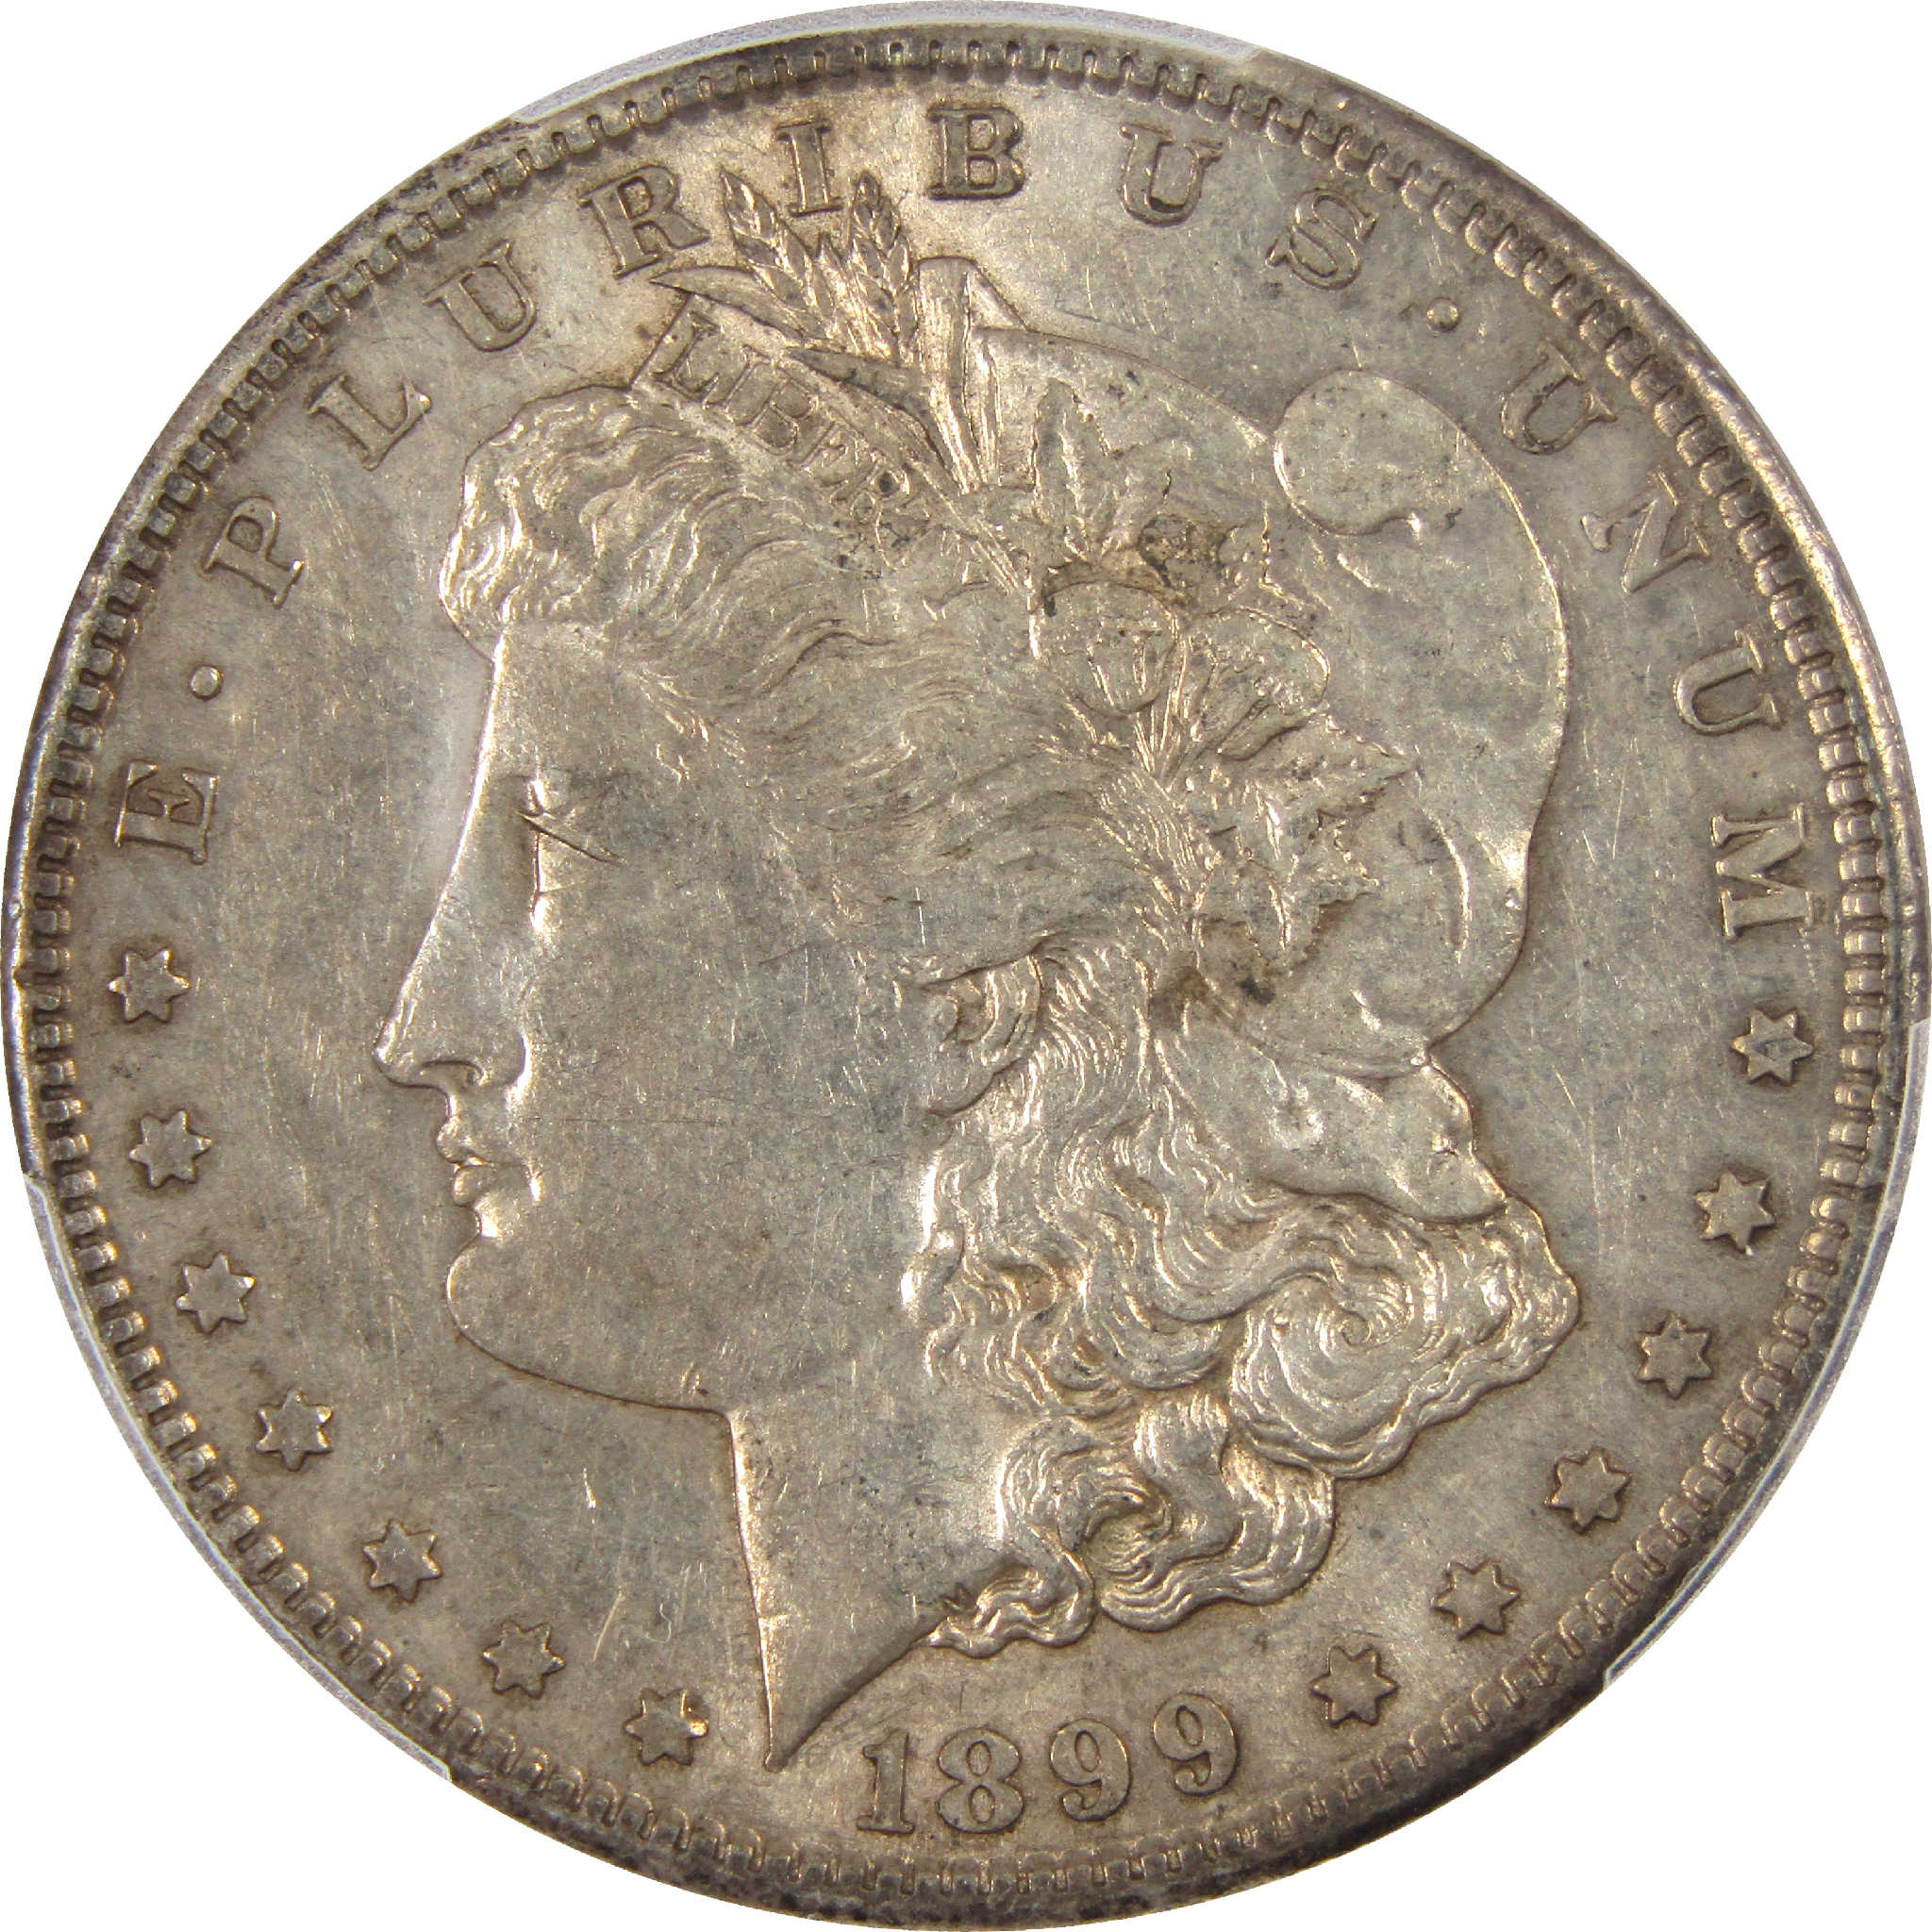 1899 S Morgan Dollar AU 53 PCGS Silver $1 Coin SKU:I11501 - Morgan coin - Morgan silver dollar - Morgan silver dollar for sale - Profile Coins &amp; Collectibles